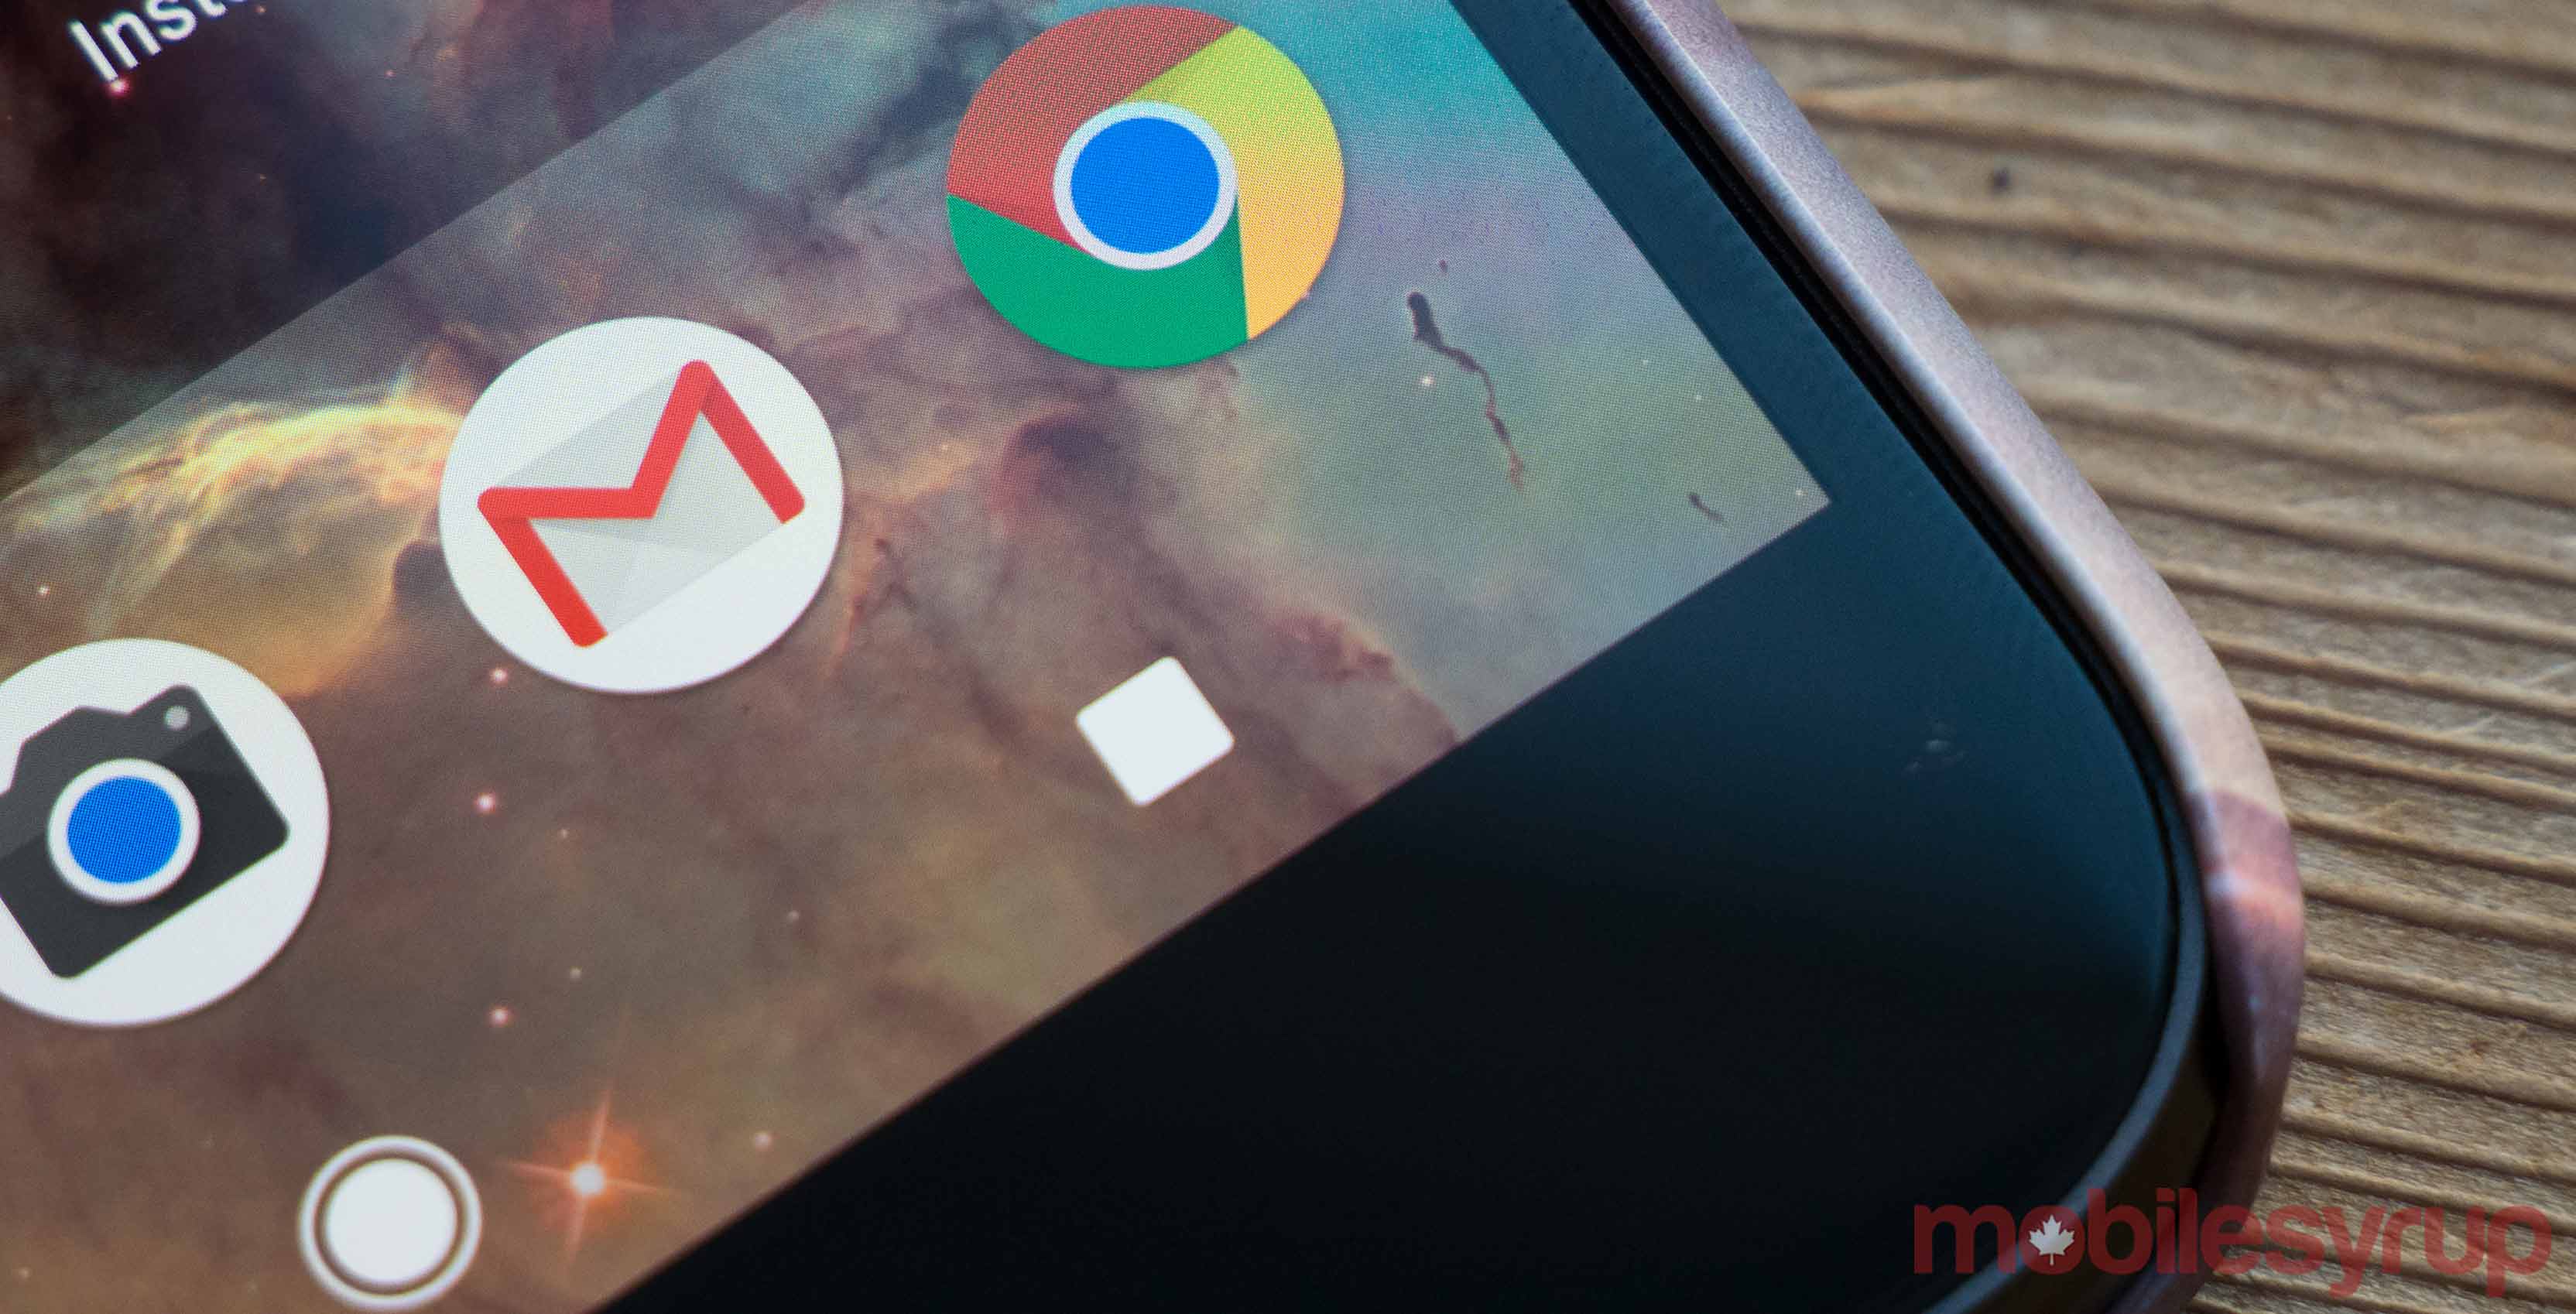 An image showing the camera, Gmail, and Chrome apps